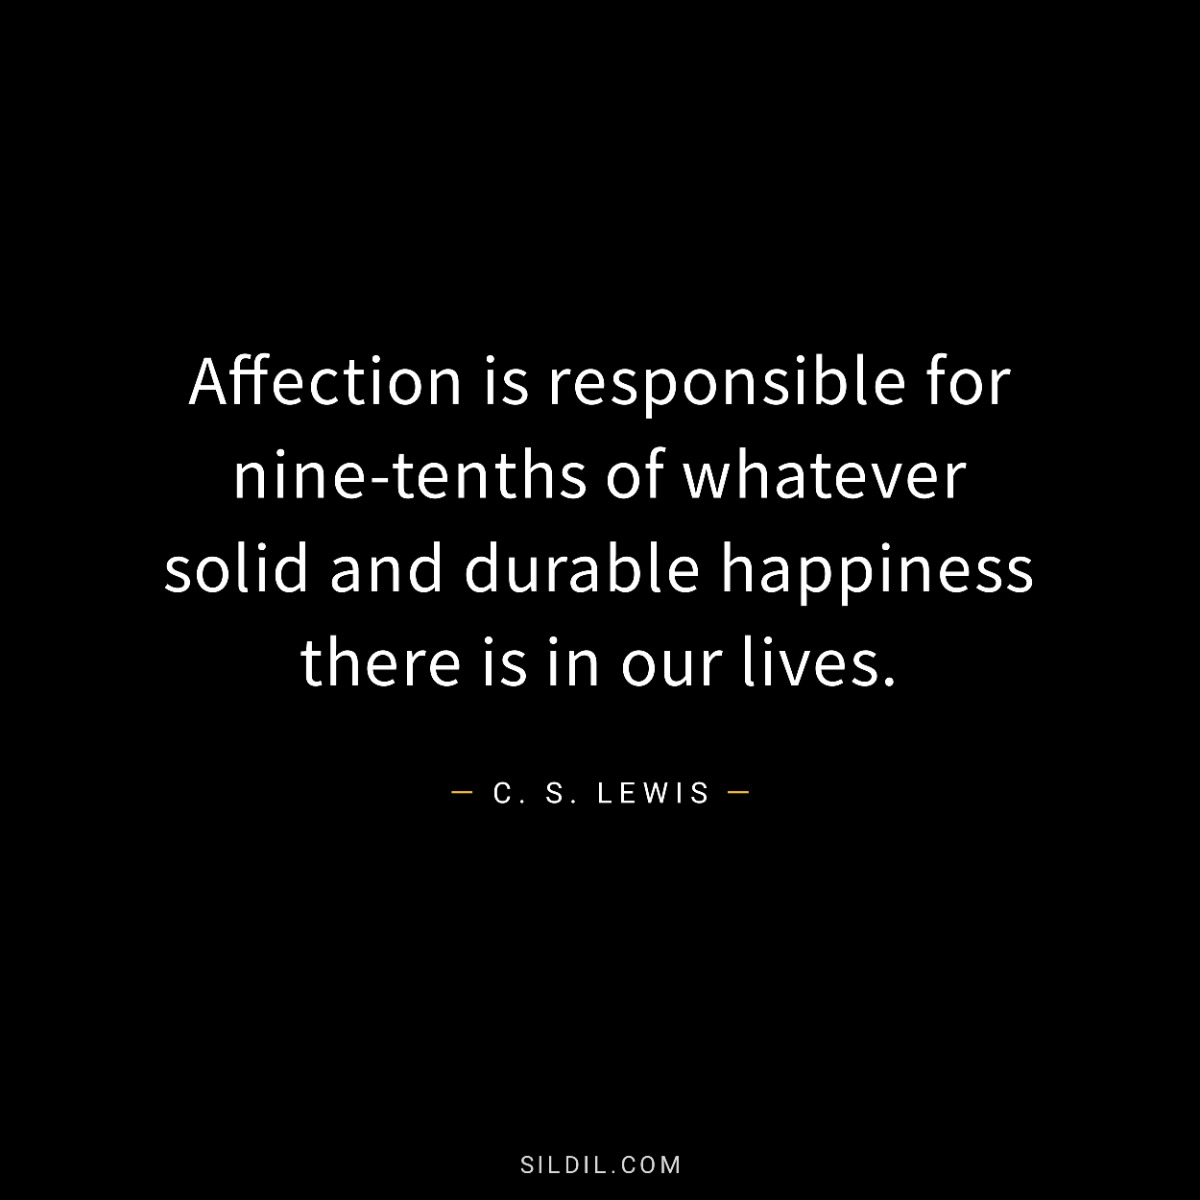 Affection is responsible for nine-tenths of whatever solid and durable happiness there is in our lives.